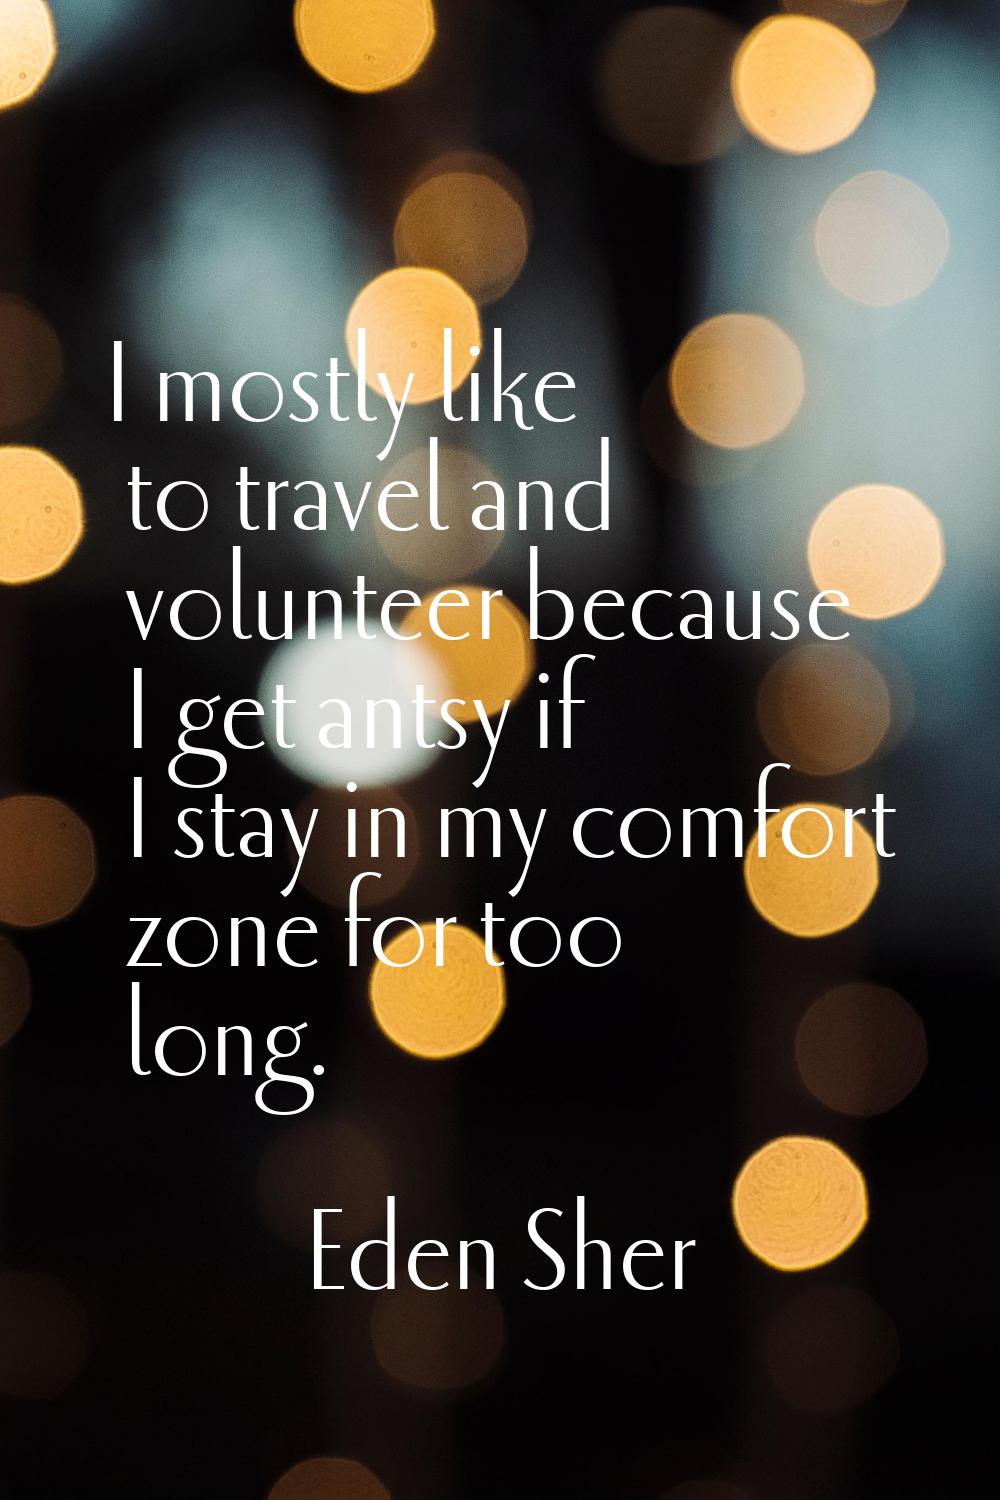 I mostly like to travel and volunteer because I get antsy if I stay in my comfort zone for too long